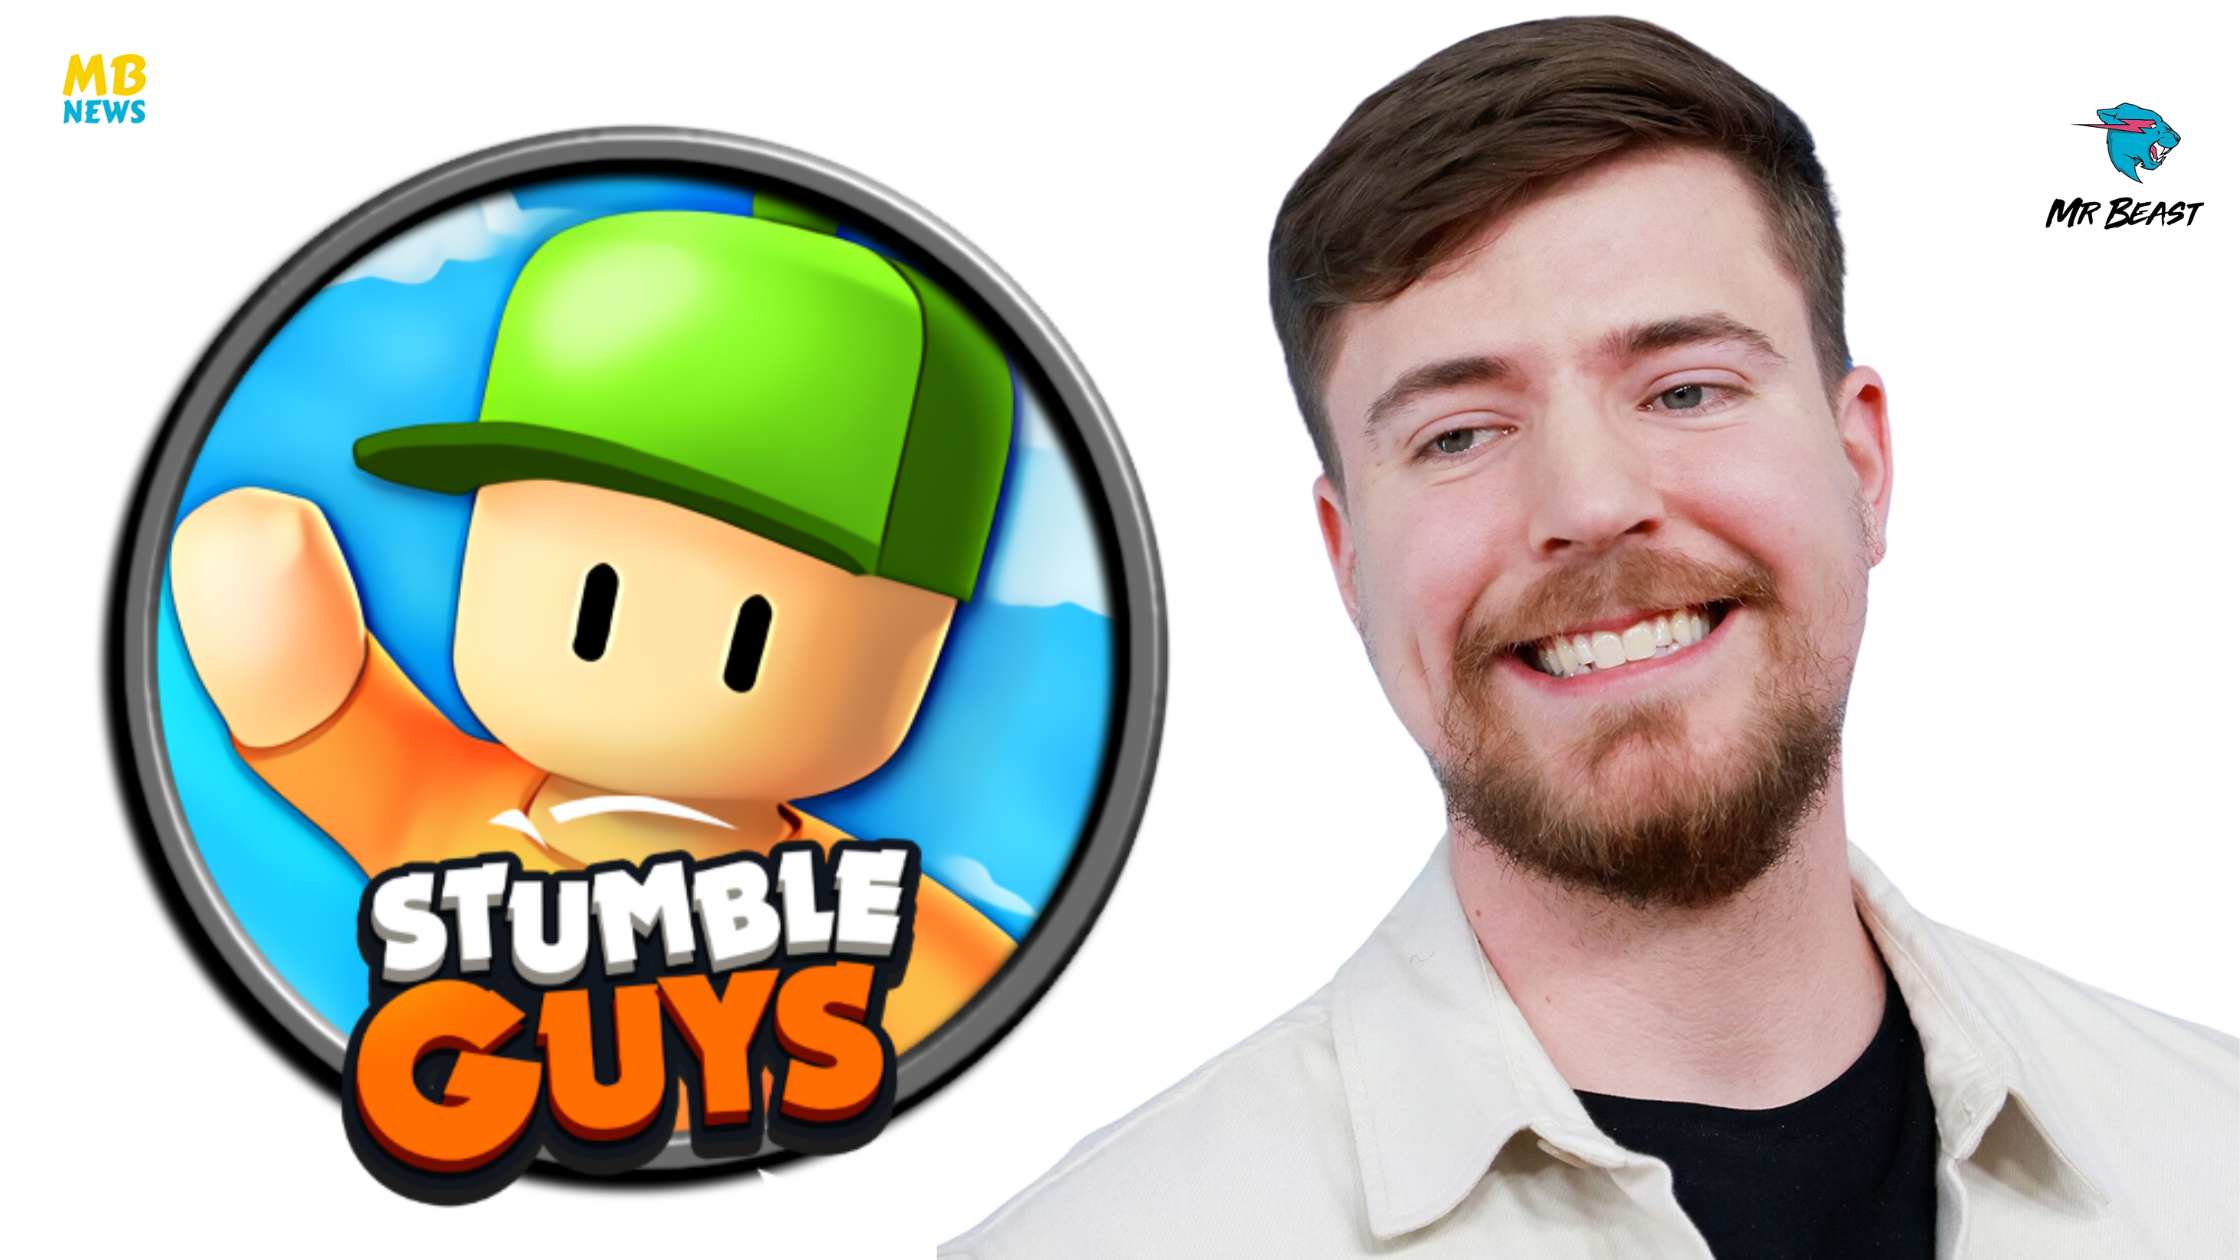 MrBeast Collaborates with Stumble Guys for Exciting In-Game Event and Merchandise!